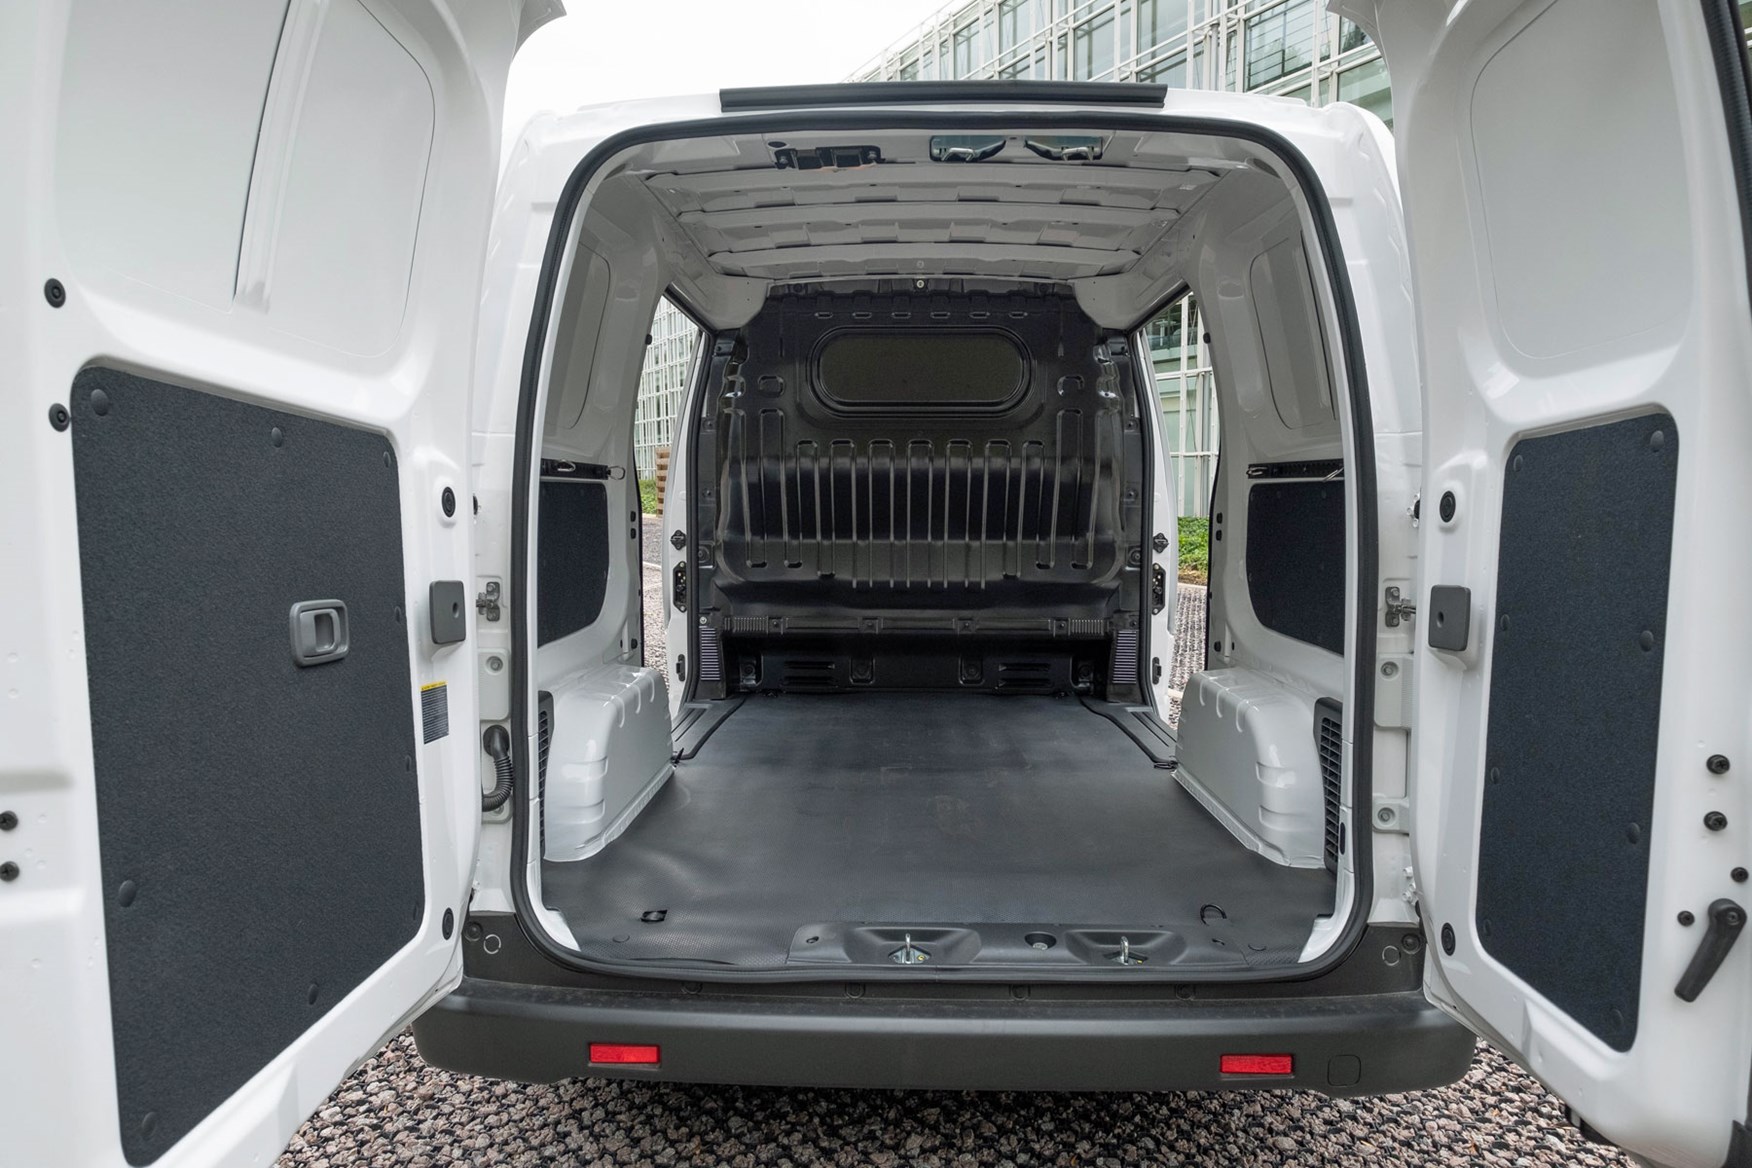 Nissan e-NV200 load area dimensions - load space, payload, 2020